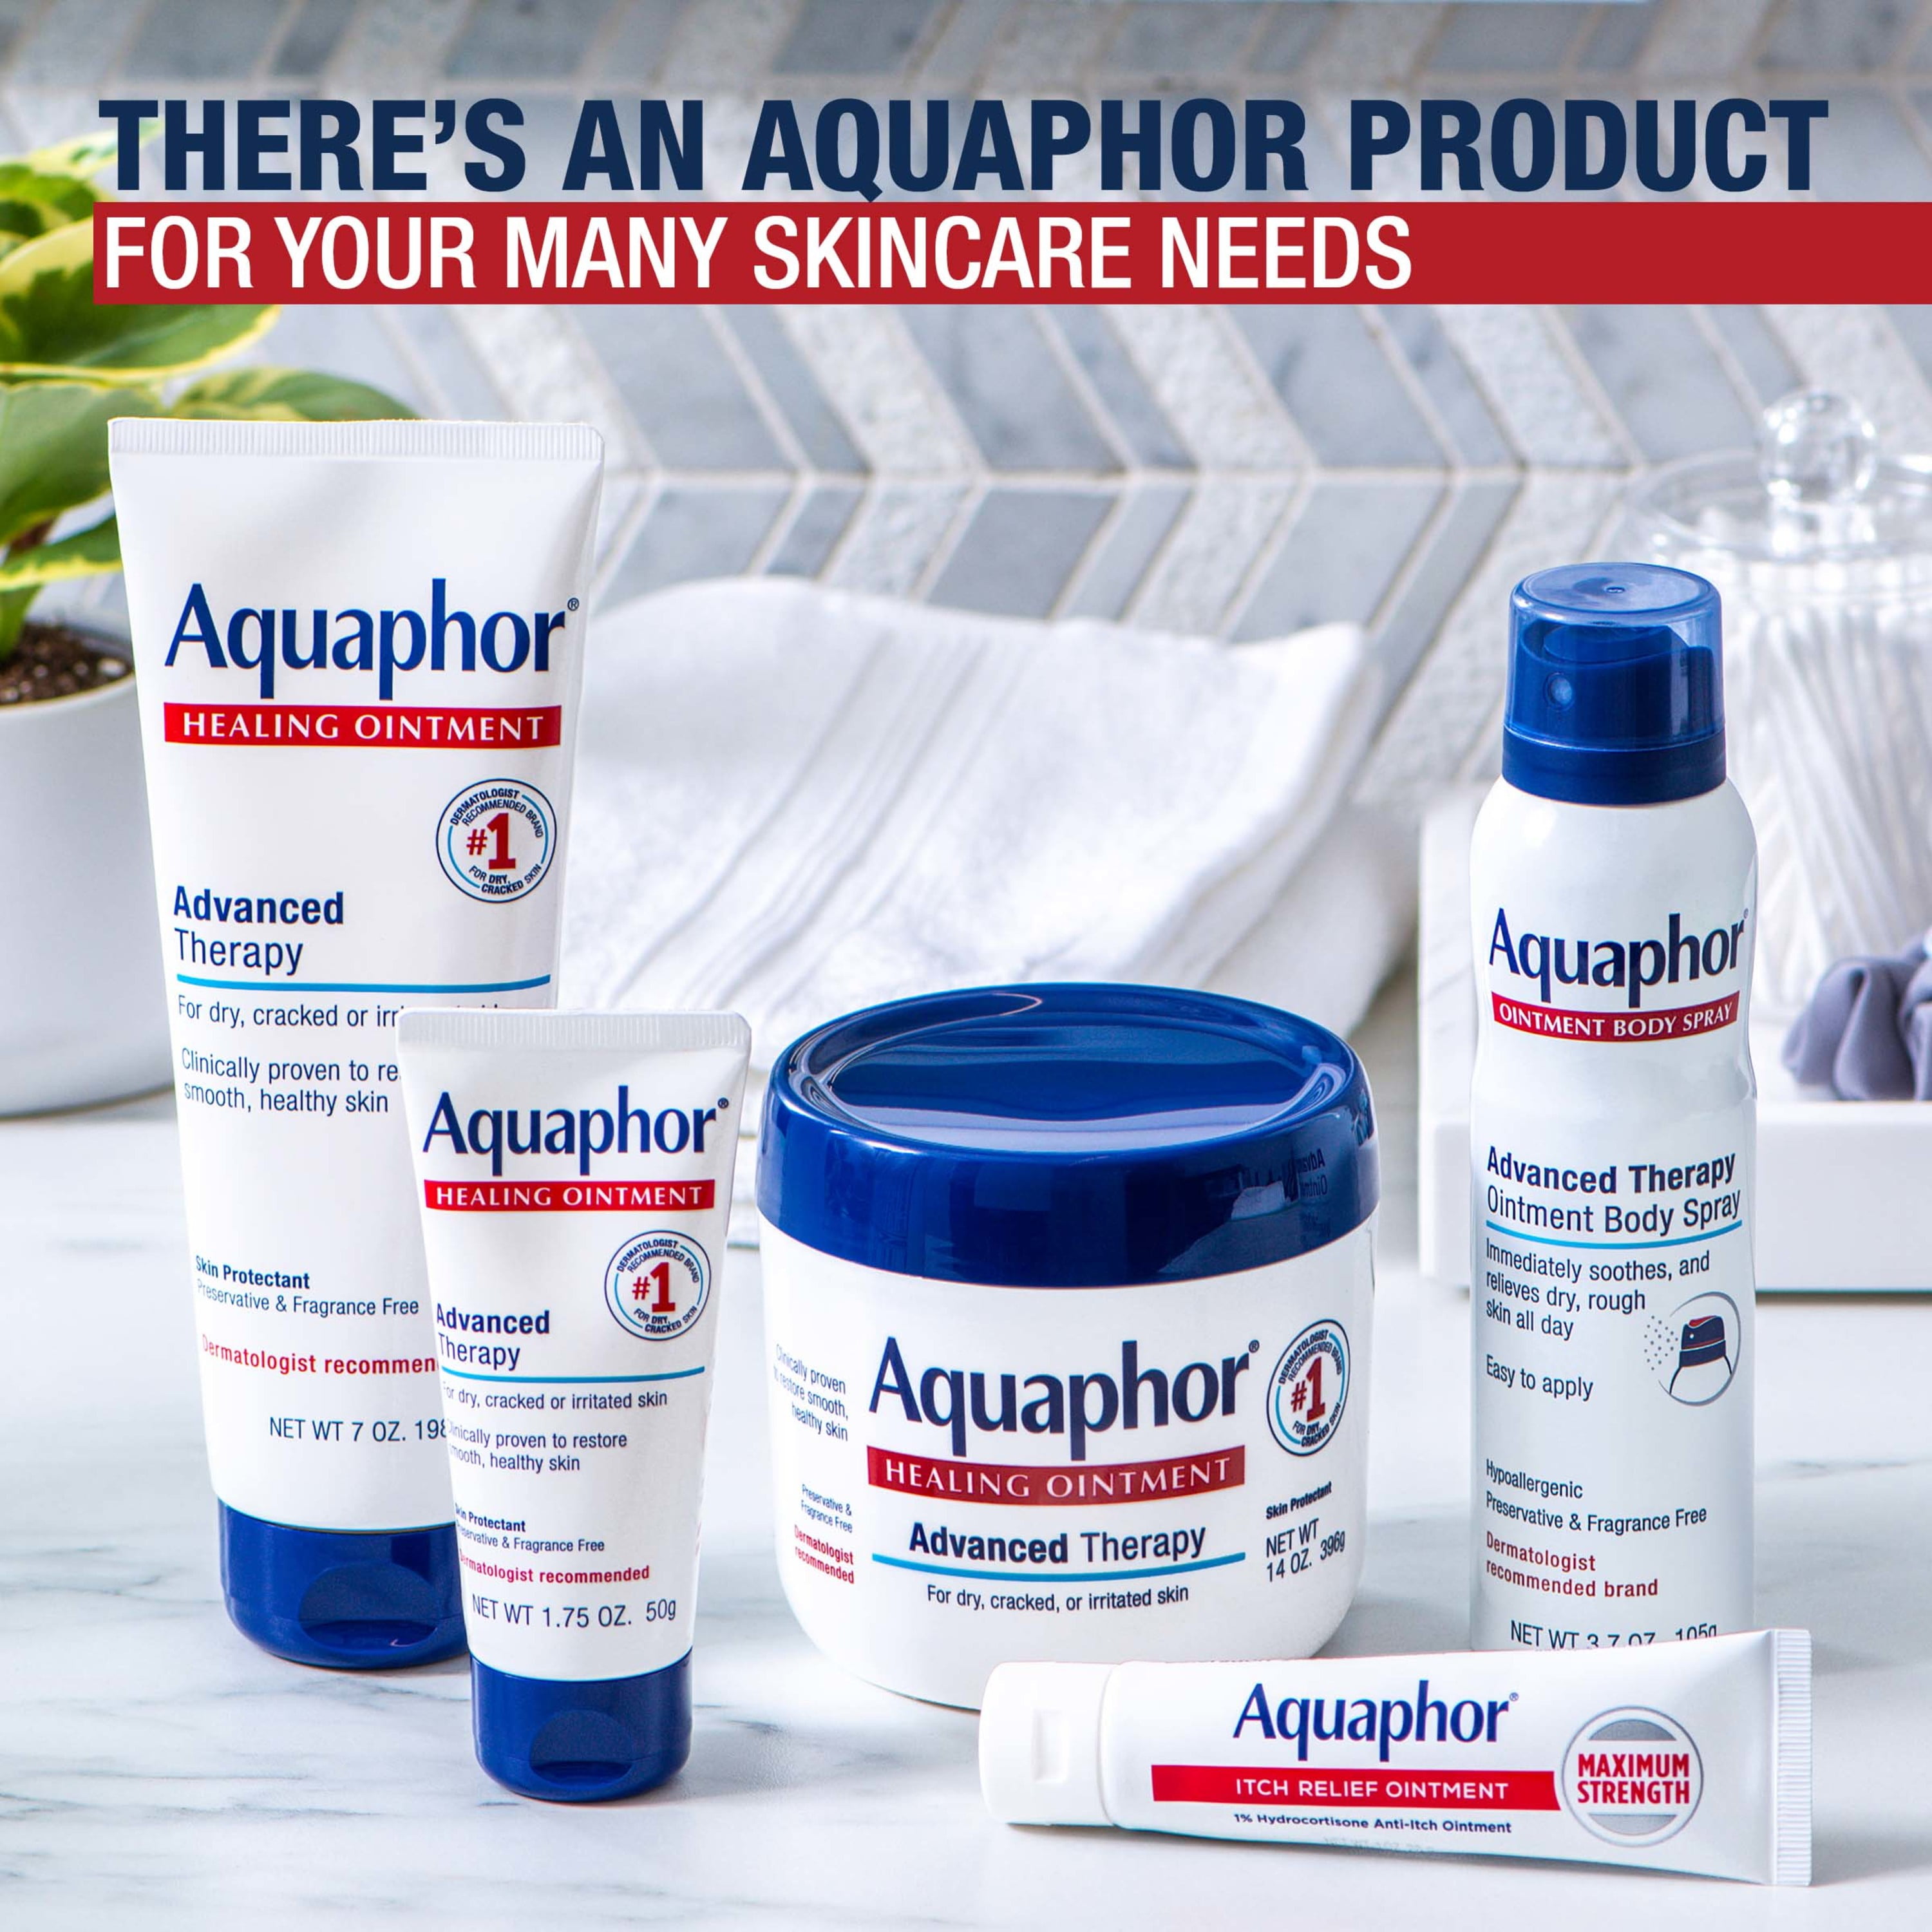 Why Does Everyone Love Aquaphor So Much?